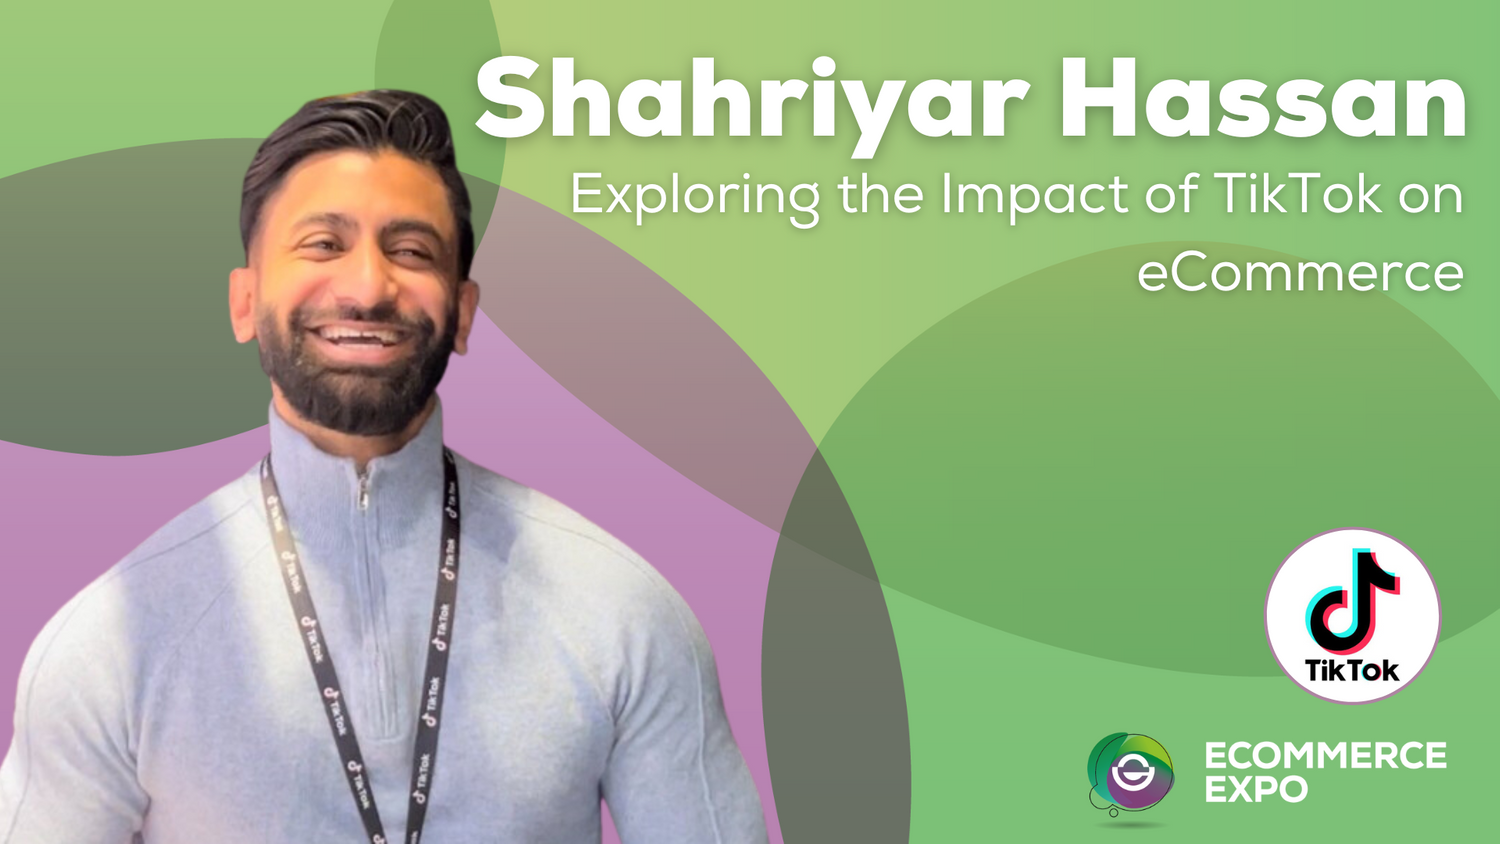 Exploring the Impact of TikTok on eCommerce with Shahriyar Hassan